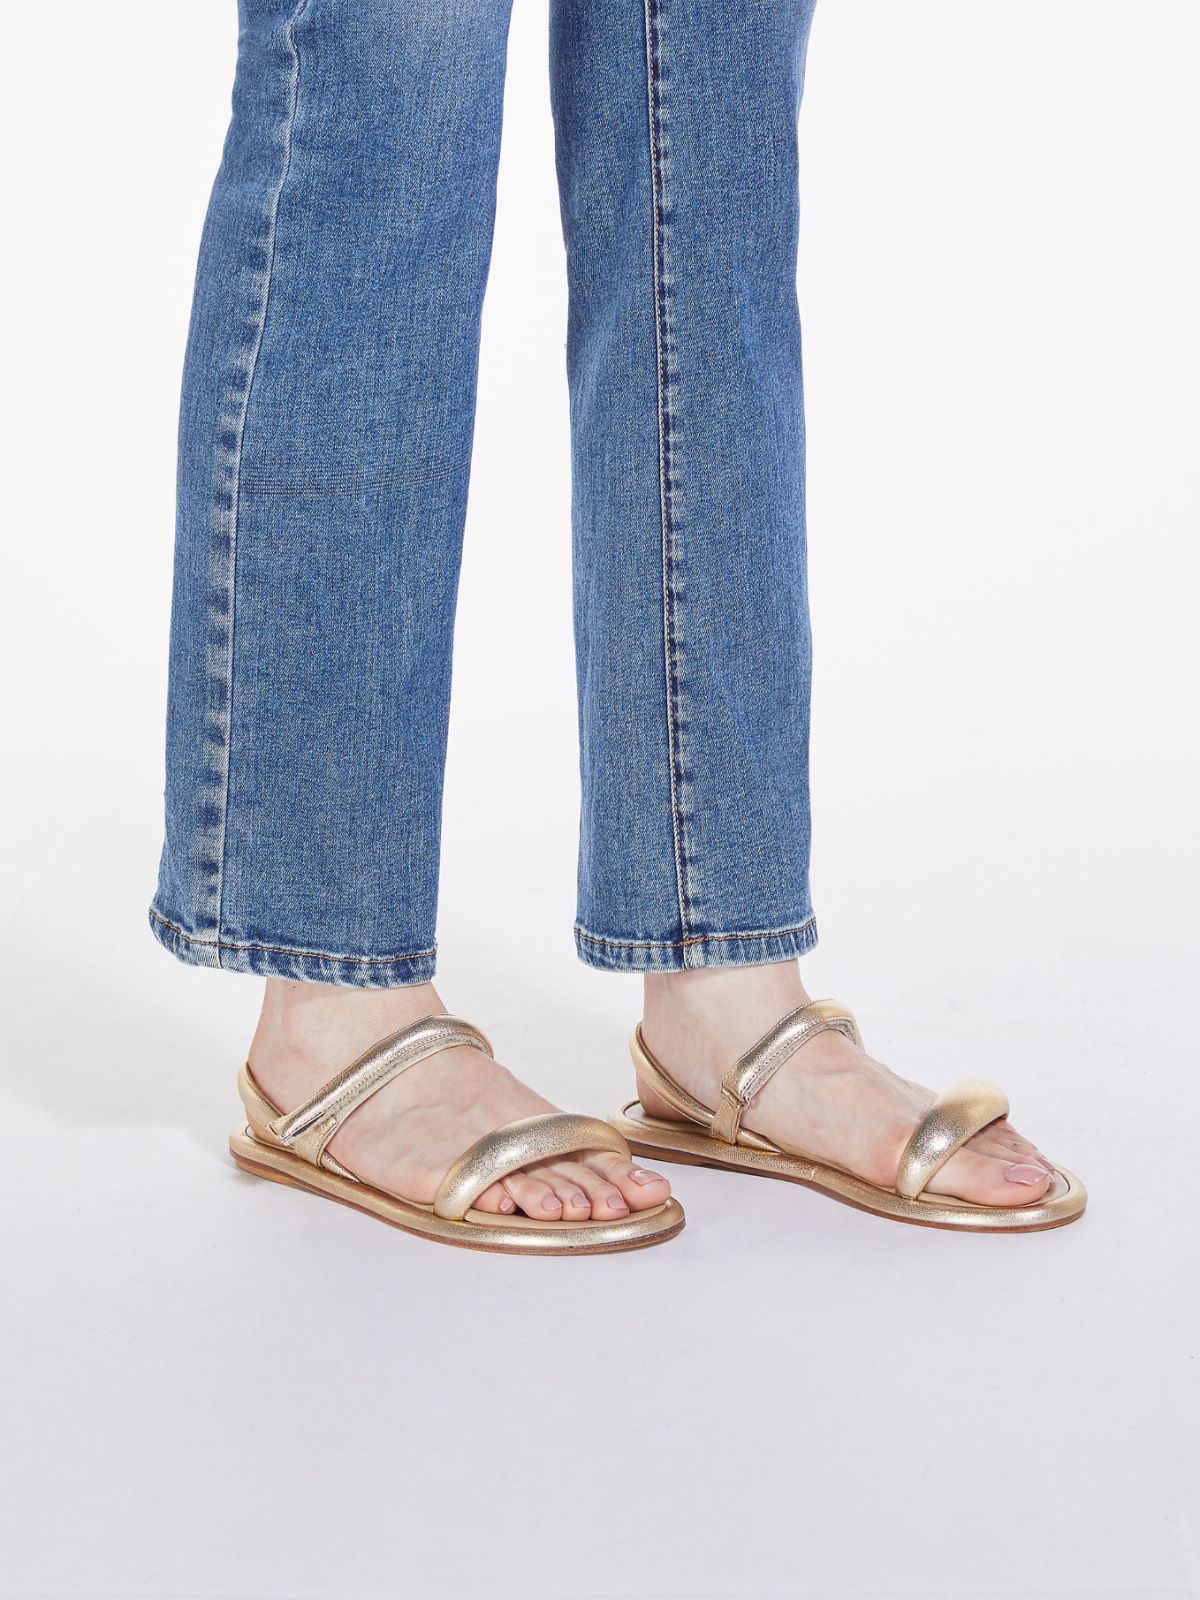 Sandals in nappa leather - GOLD - Weekend Max Mara - 8